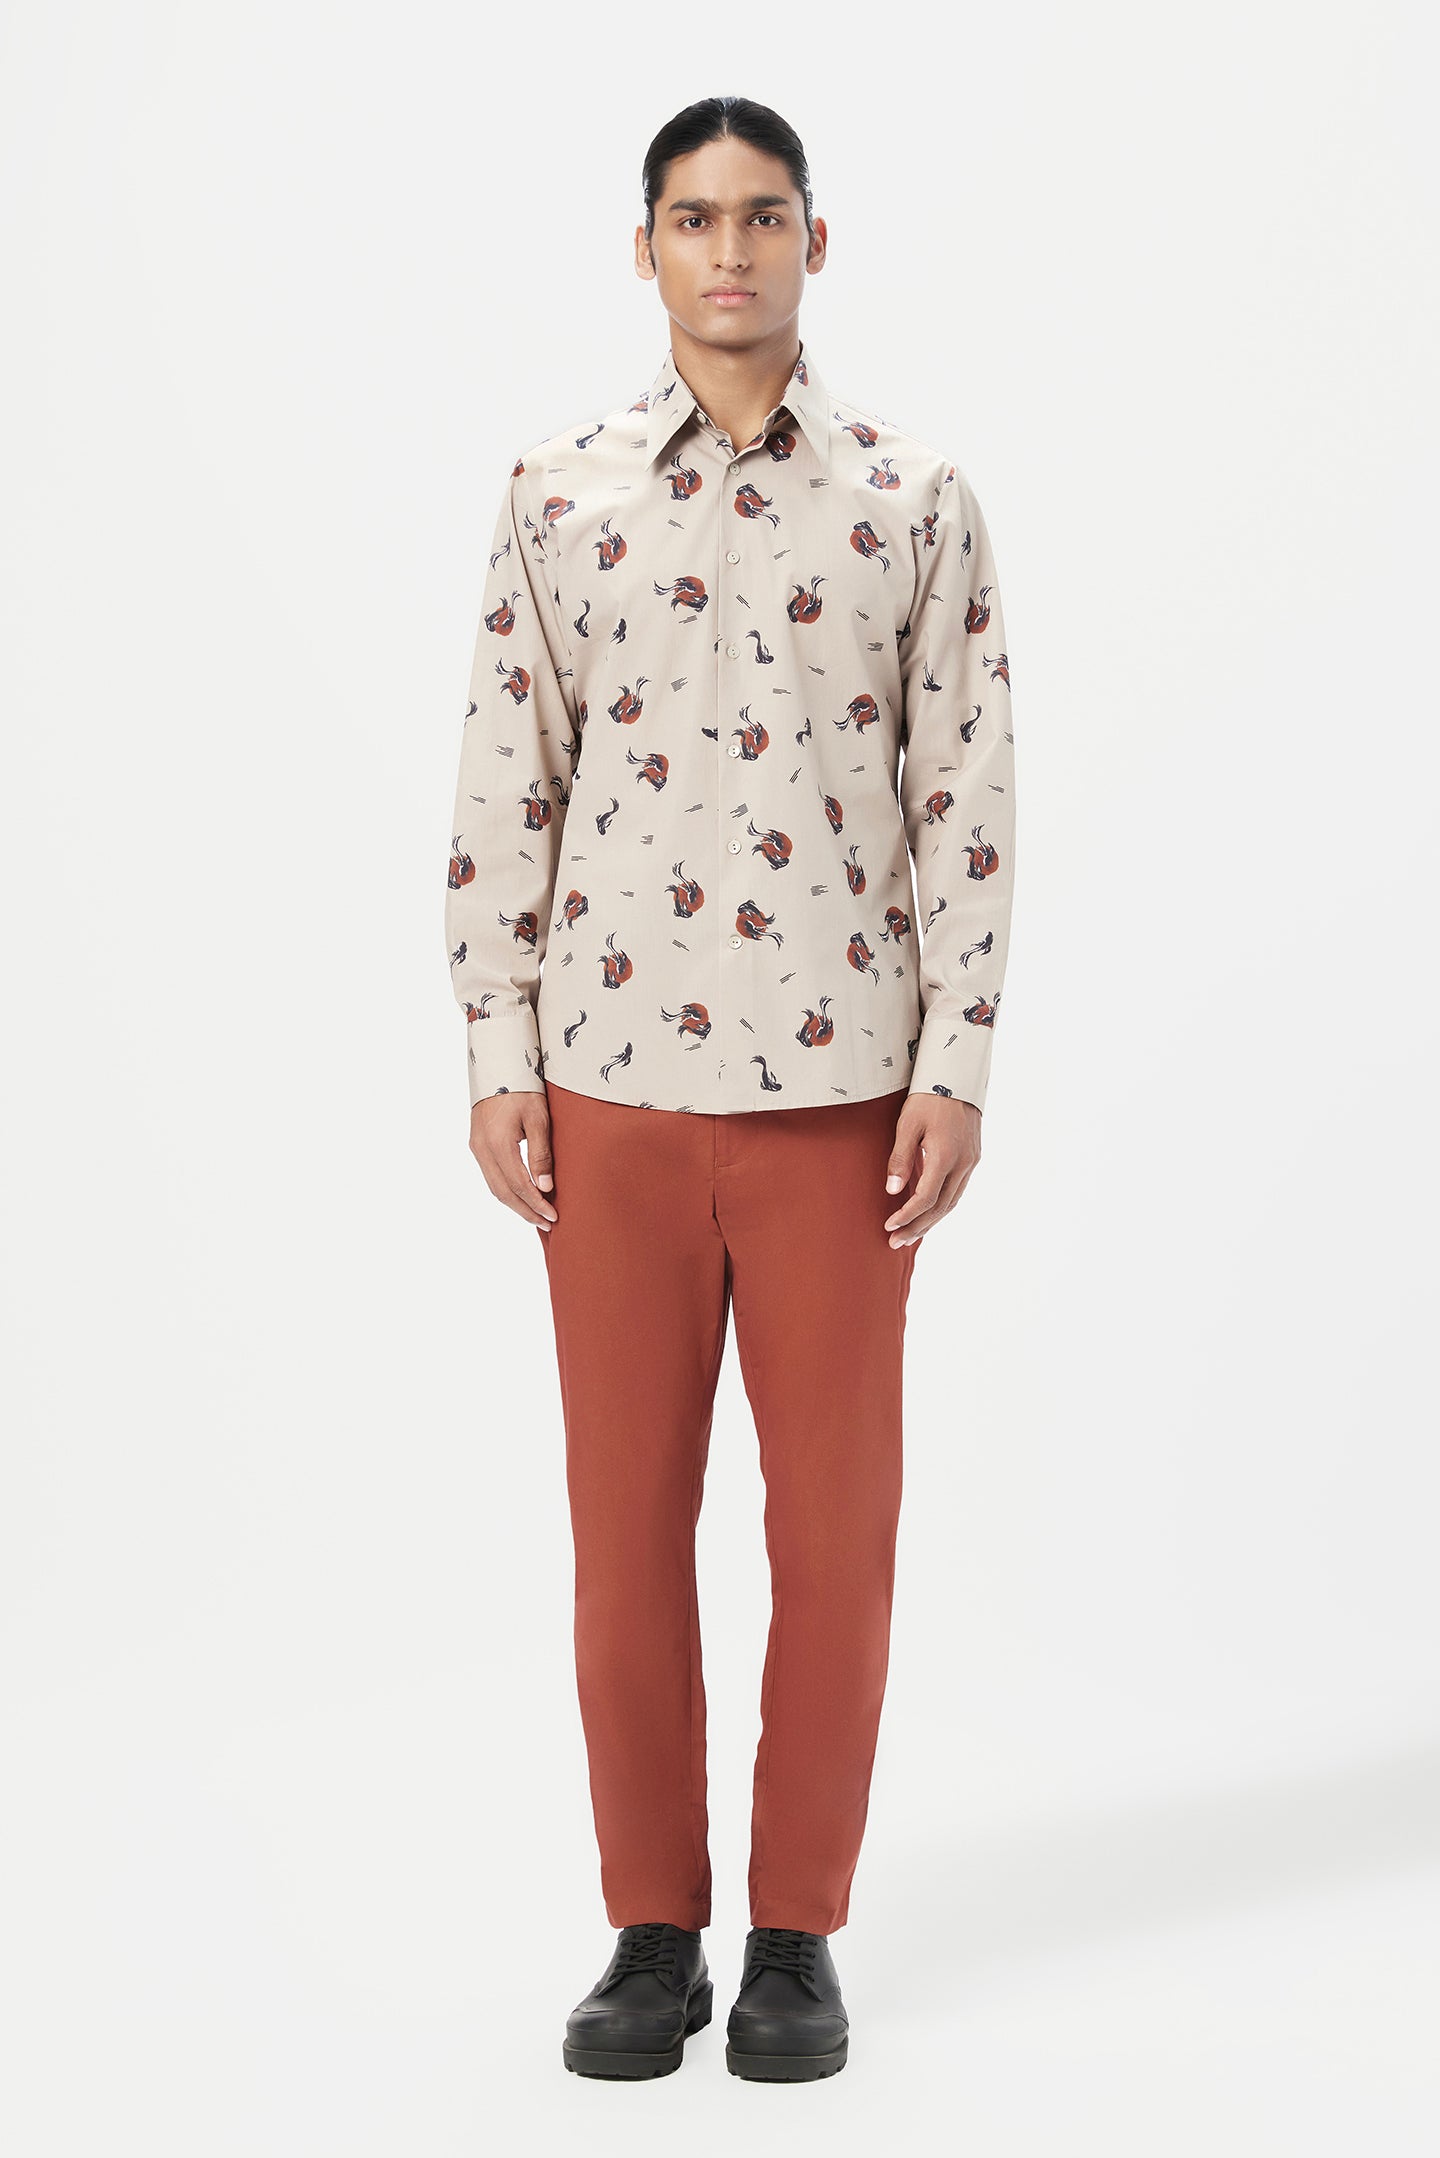 Regular Fit Button-Down Shirt in an All-Over Fish Print